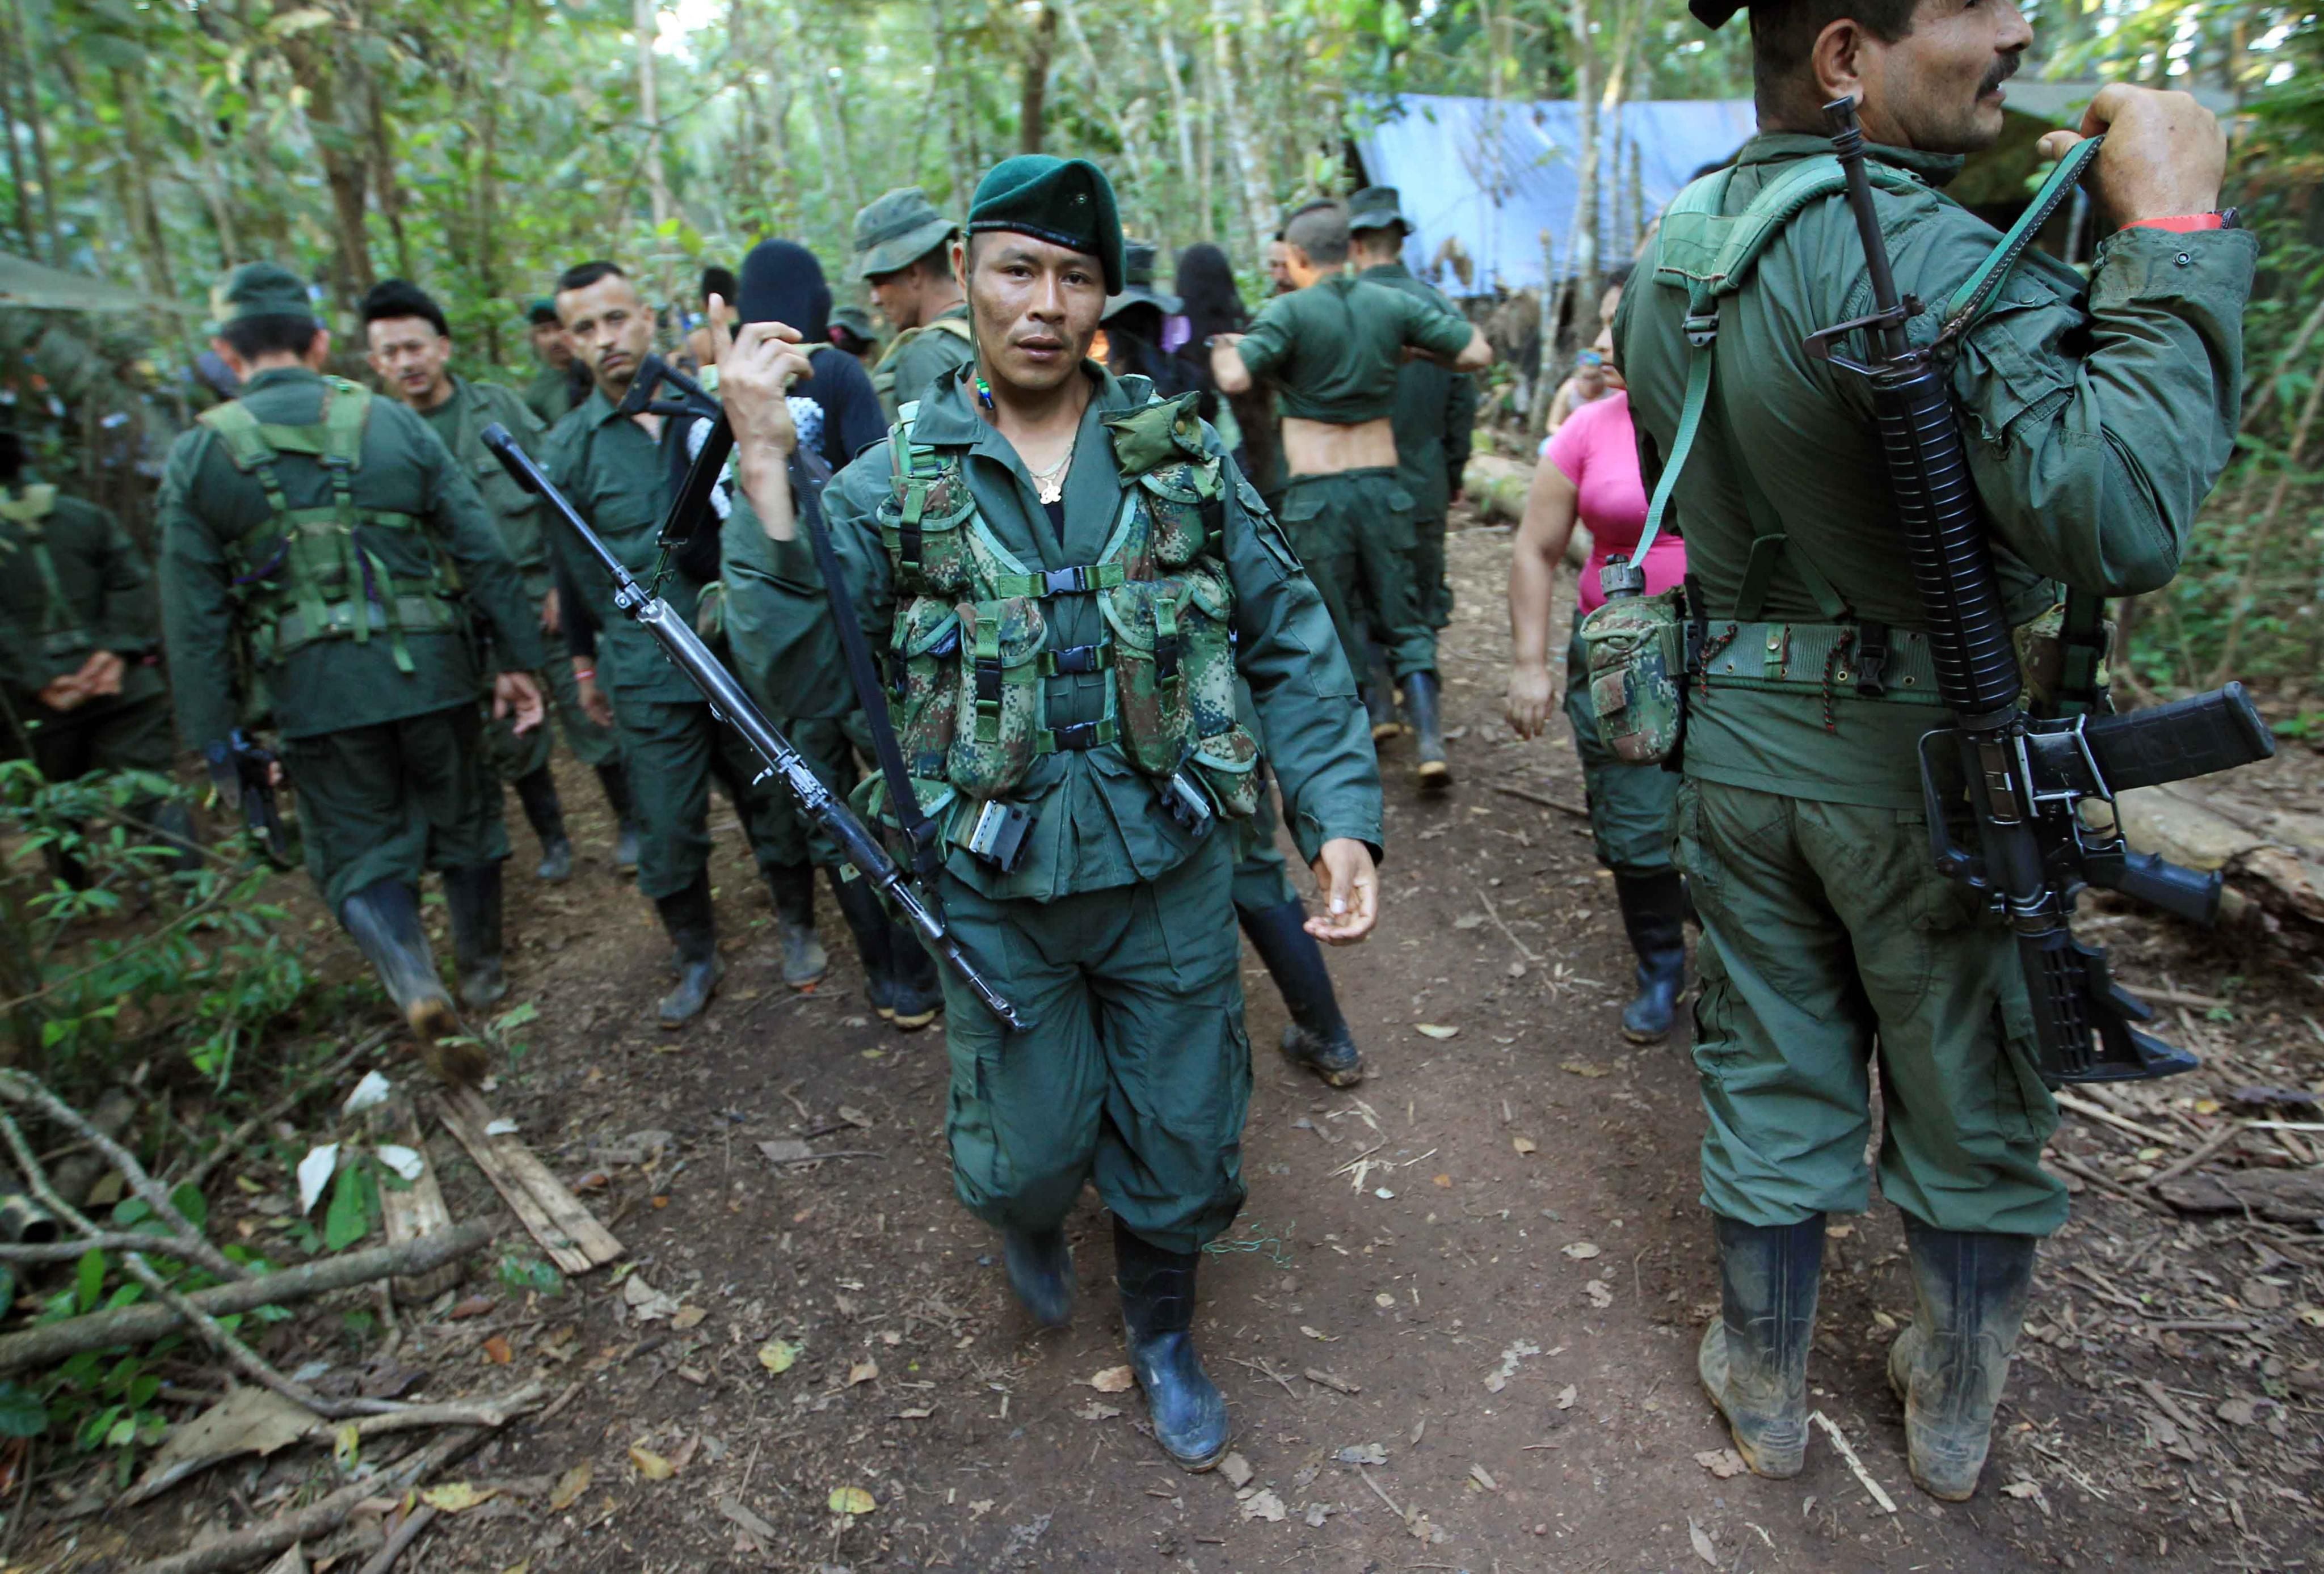 Since 2016, some 13,000 FARC guerrillas have been demobilized.  But some 5,000 have ignored the peace agreement and have continued with their criminal activities, especially related to drug trafficking.  EFE